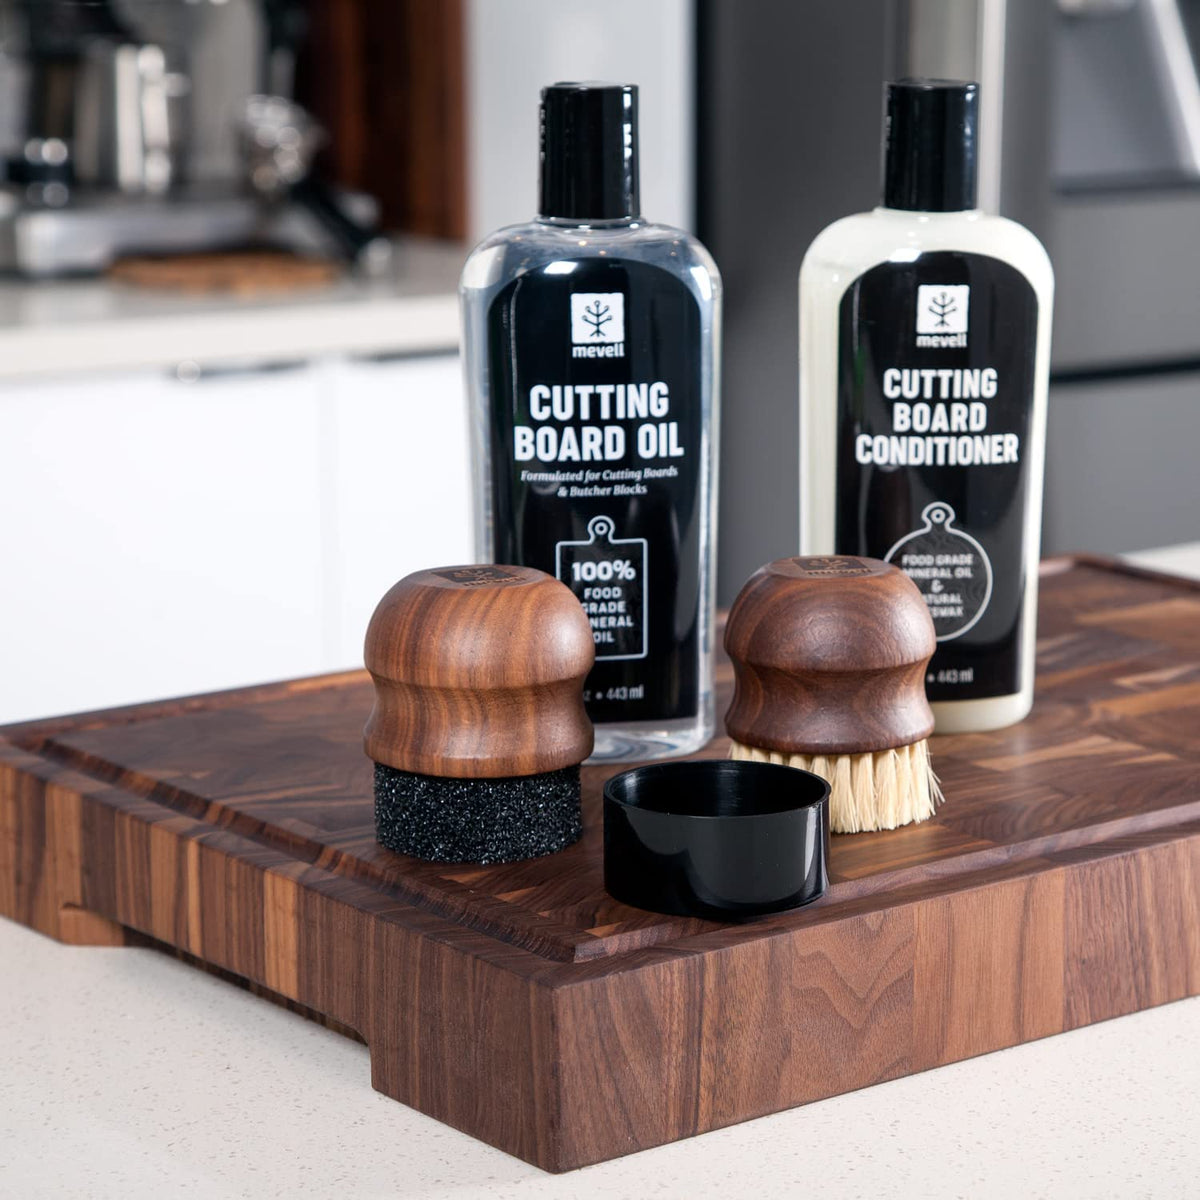 Mevell cutting board care products including oil applicator, washing brush, cutting board and conditioner